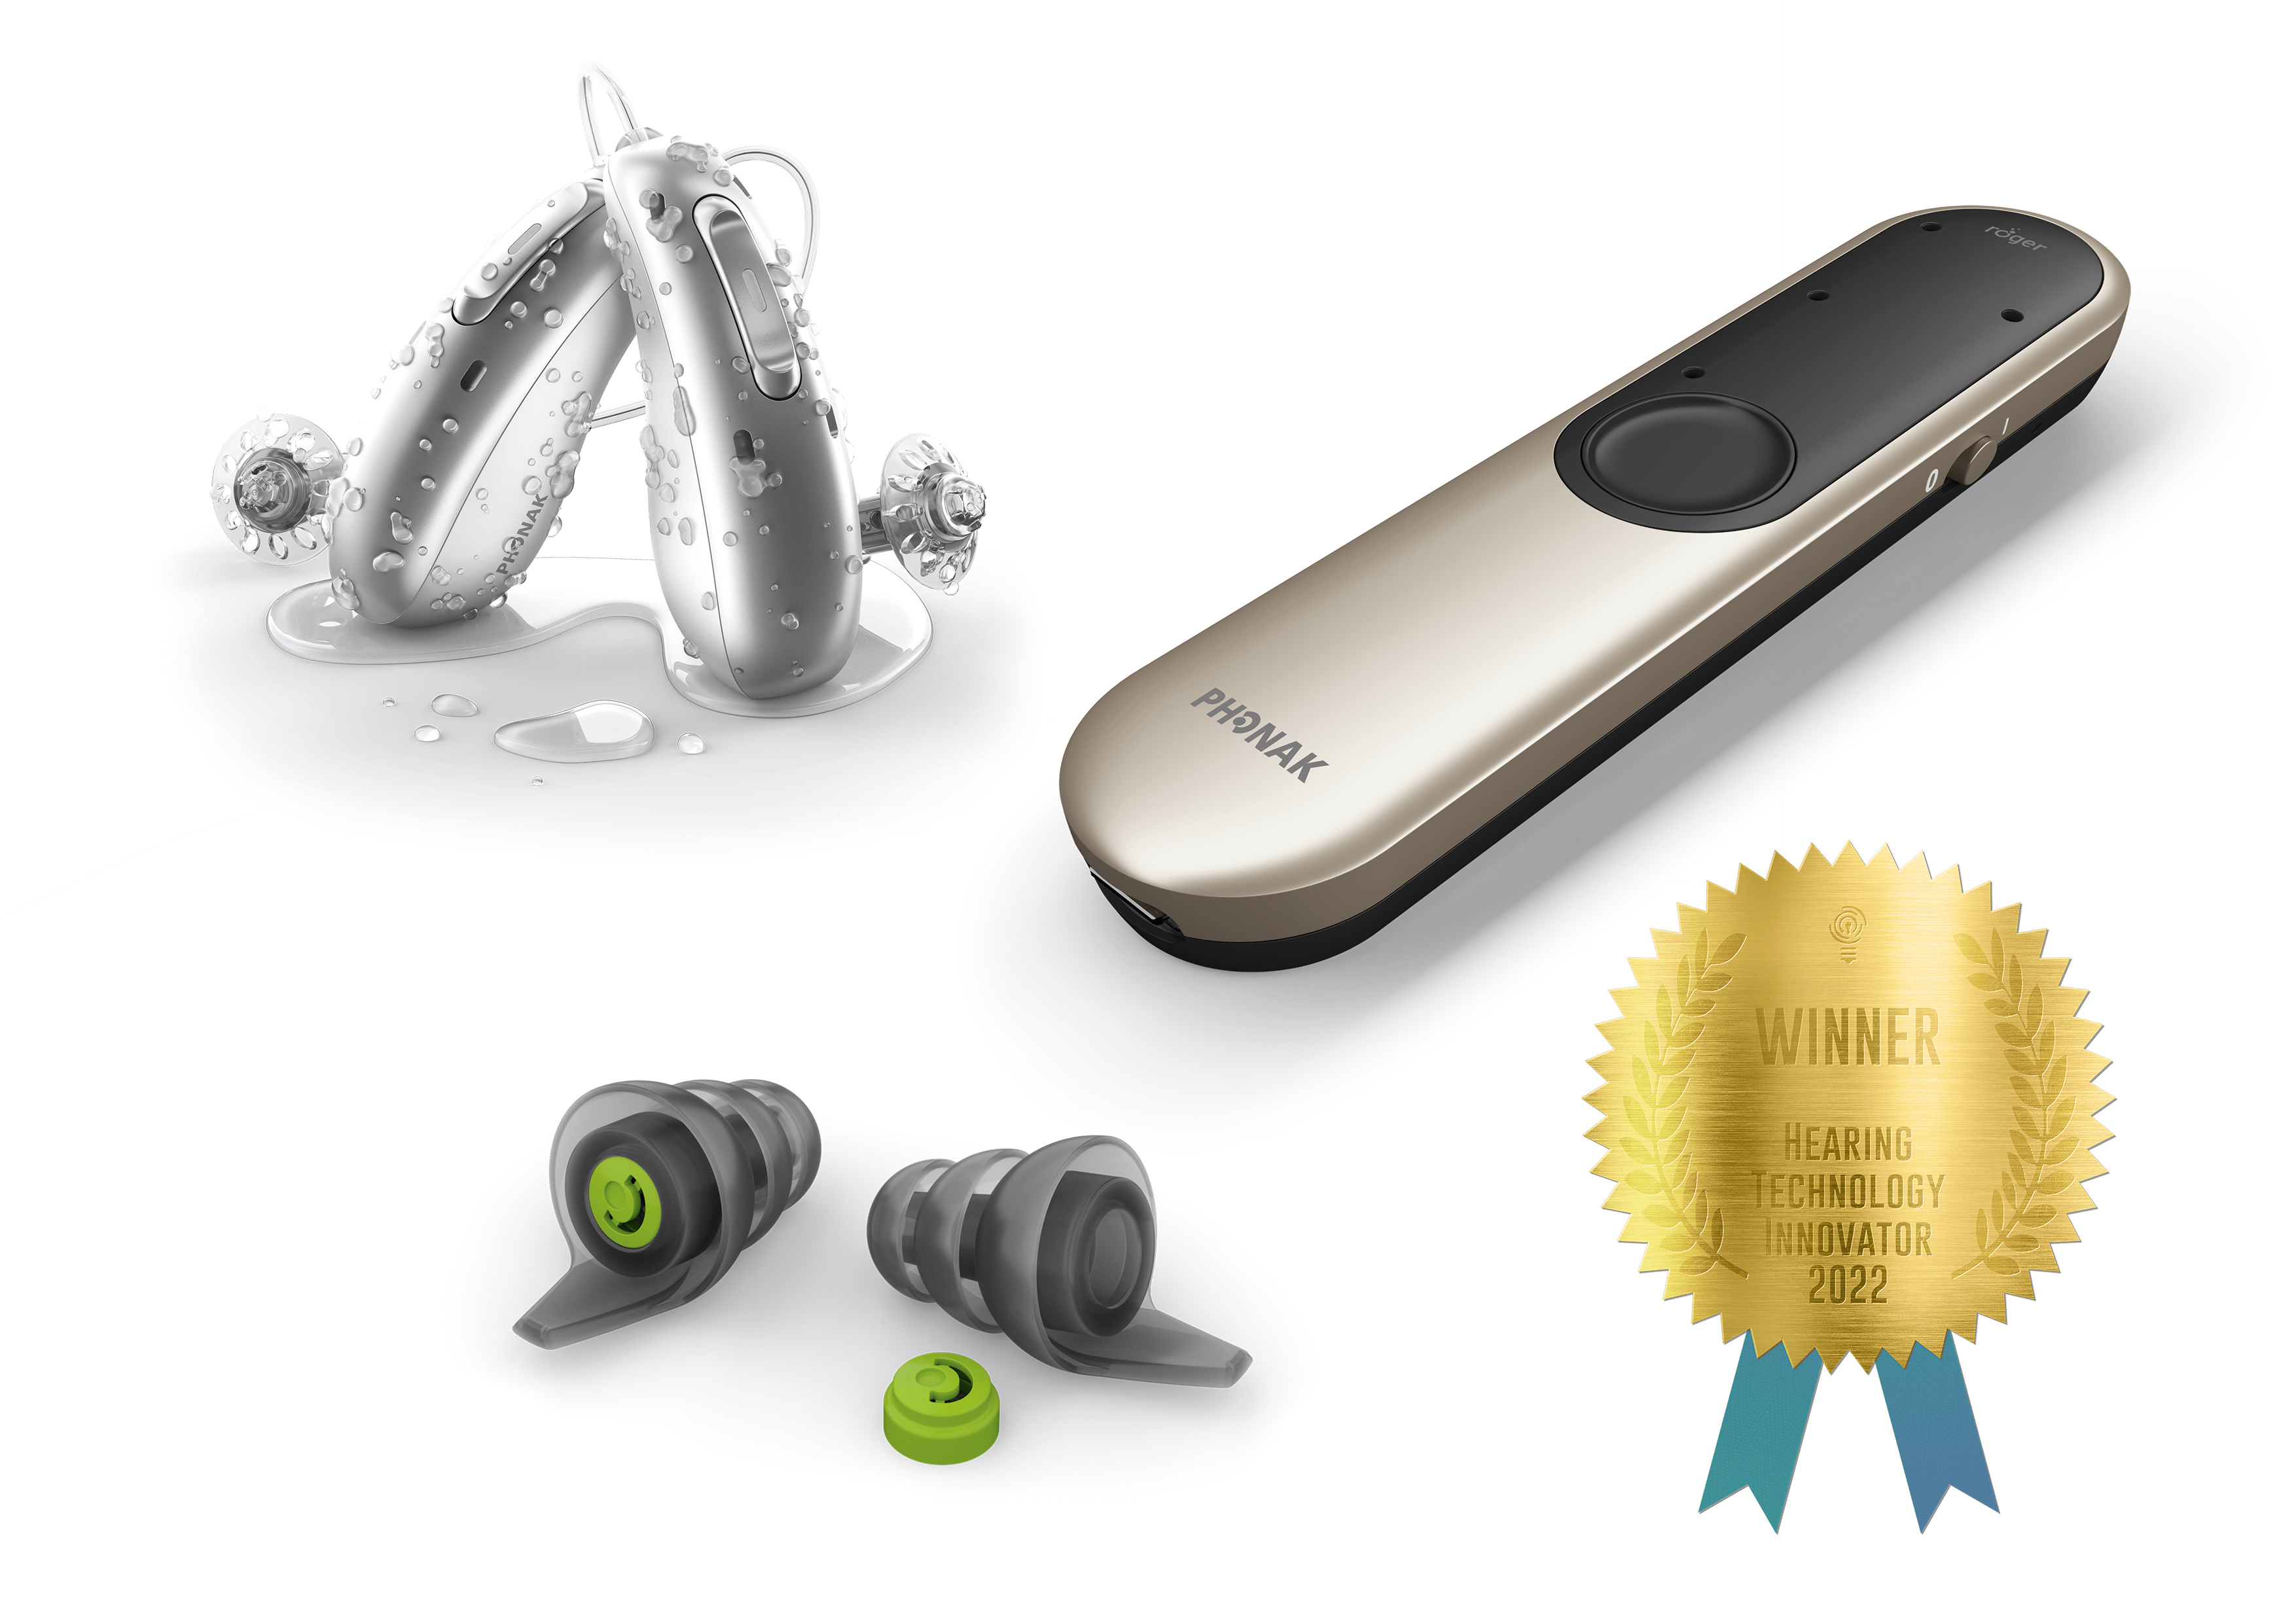 Phonak, Friday October 21, 2022, image for press release